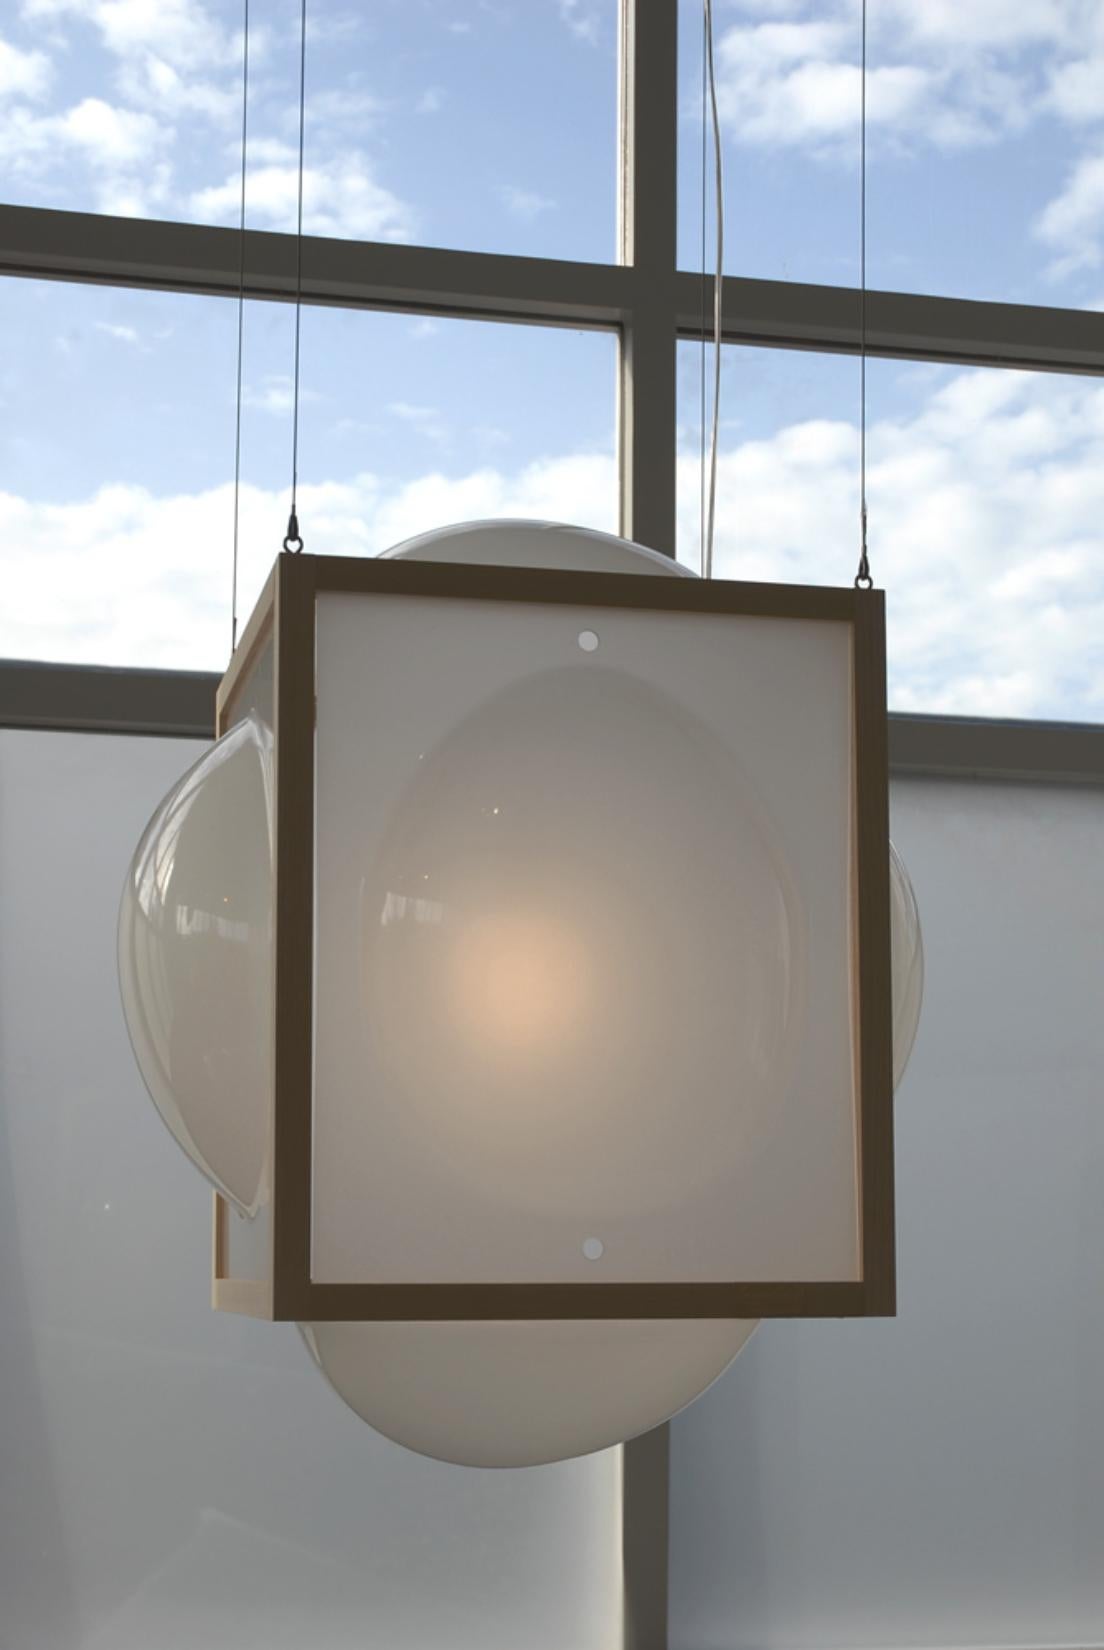 Large hanging Curator Opaque lamp by Studio Thier & van Daalen
Dimensions: W 115 x D 115 x H 120 cm
Materials: Ash, Acrylic glass, glass
Also available: Extra options available

These bubbles in a wooden frame brighten up your day! As if your